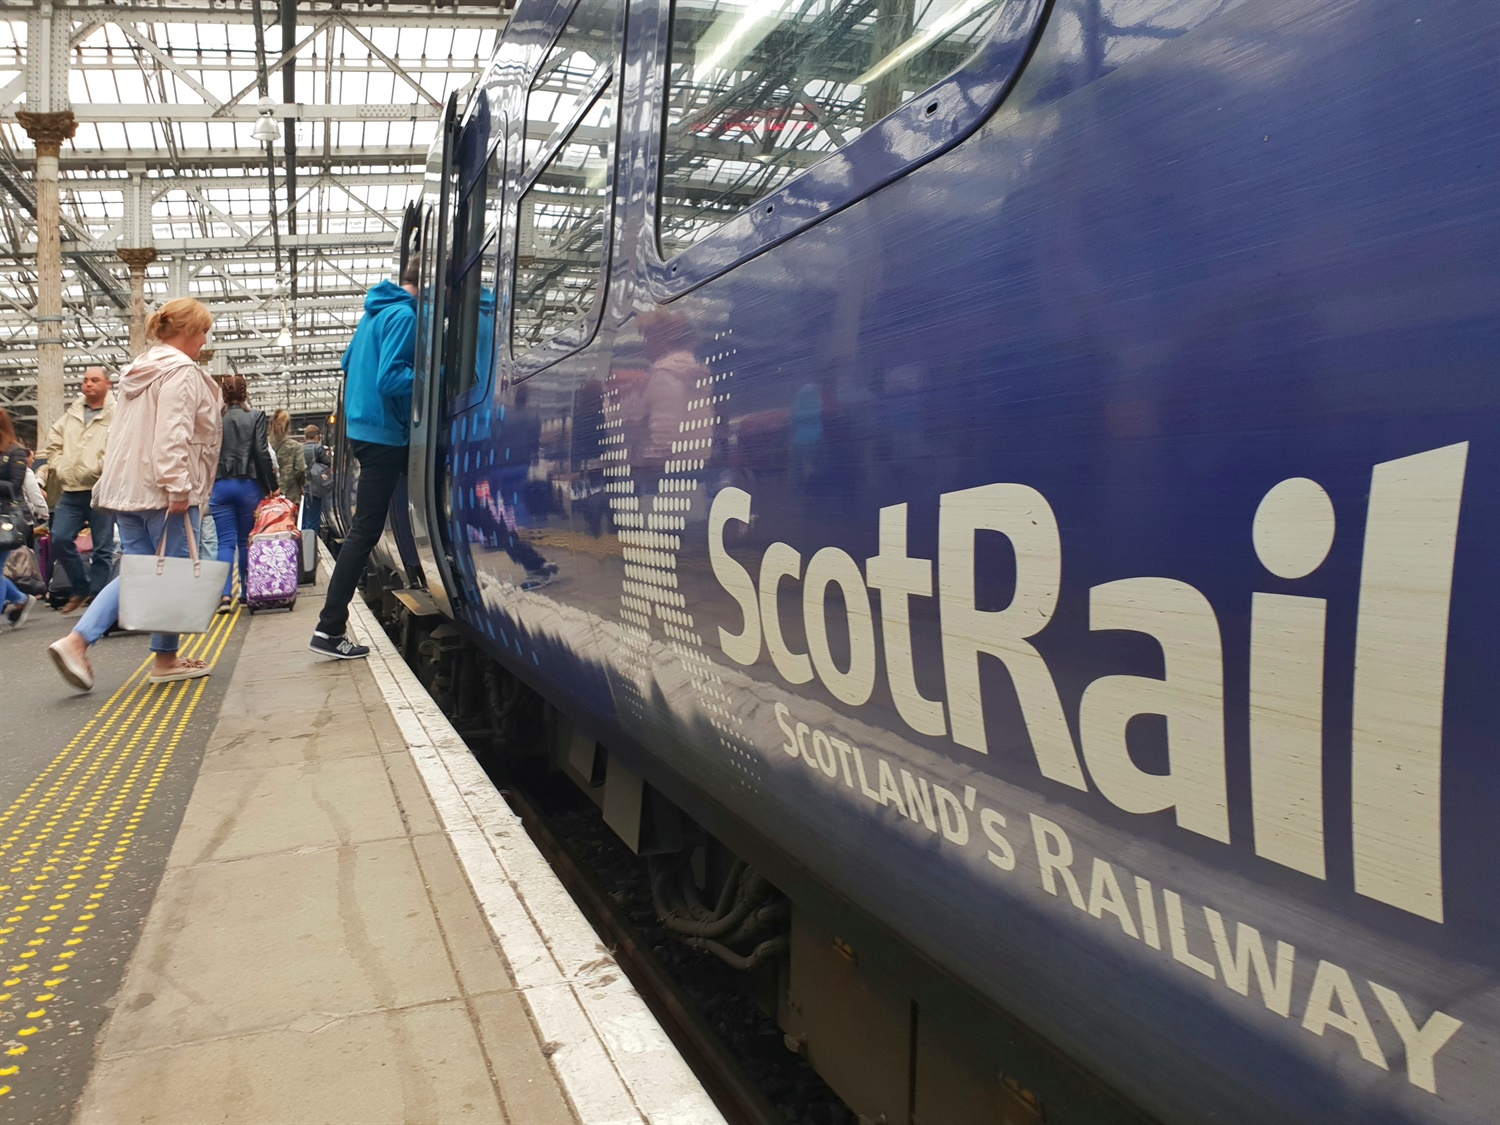 Passengers ‘deserve better’ as ScotRail fined £2.2m for failing to meet performance targets